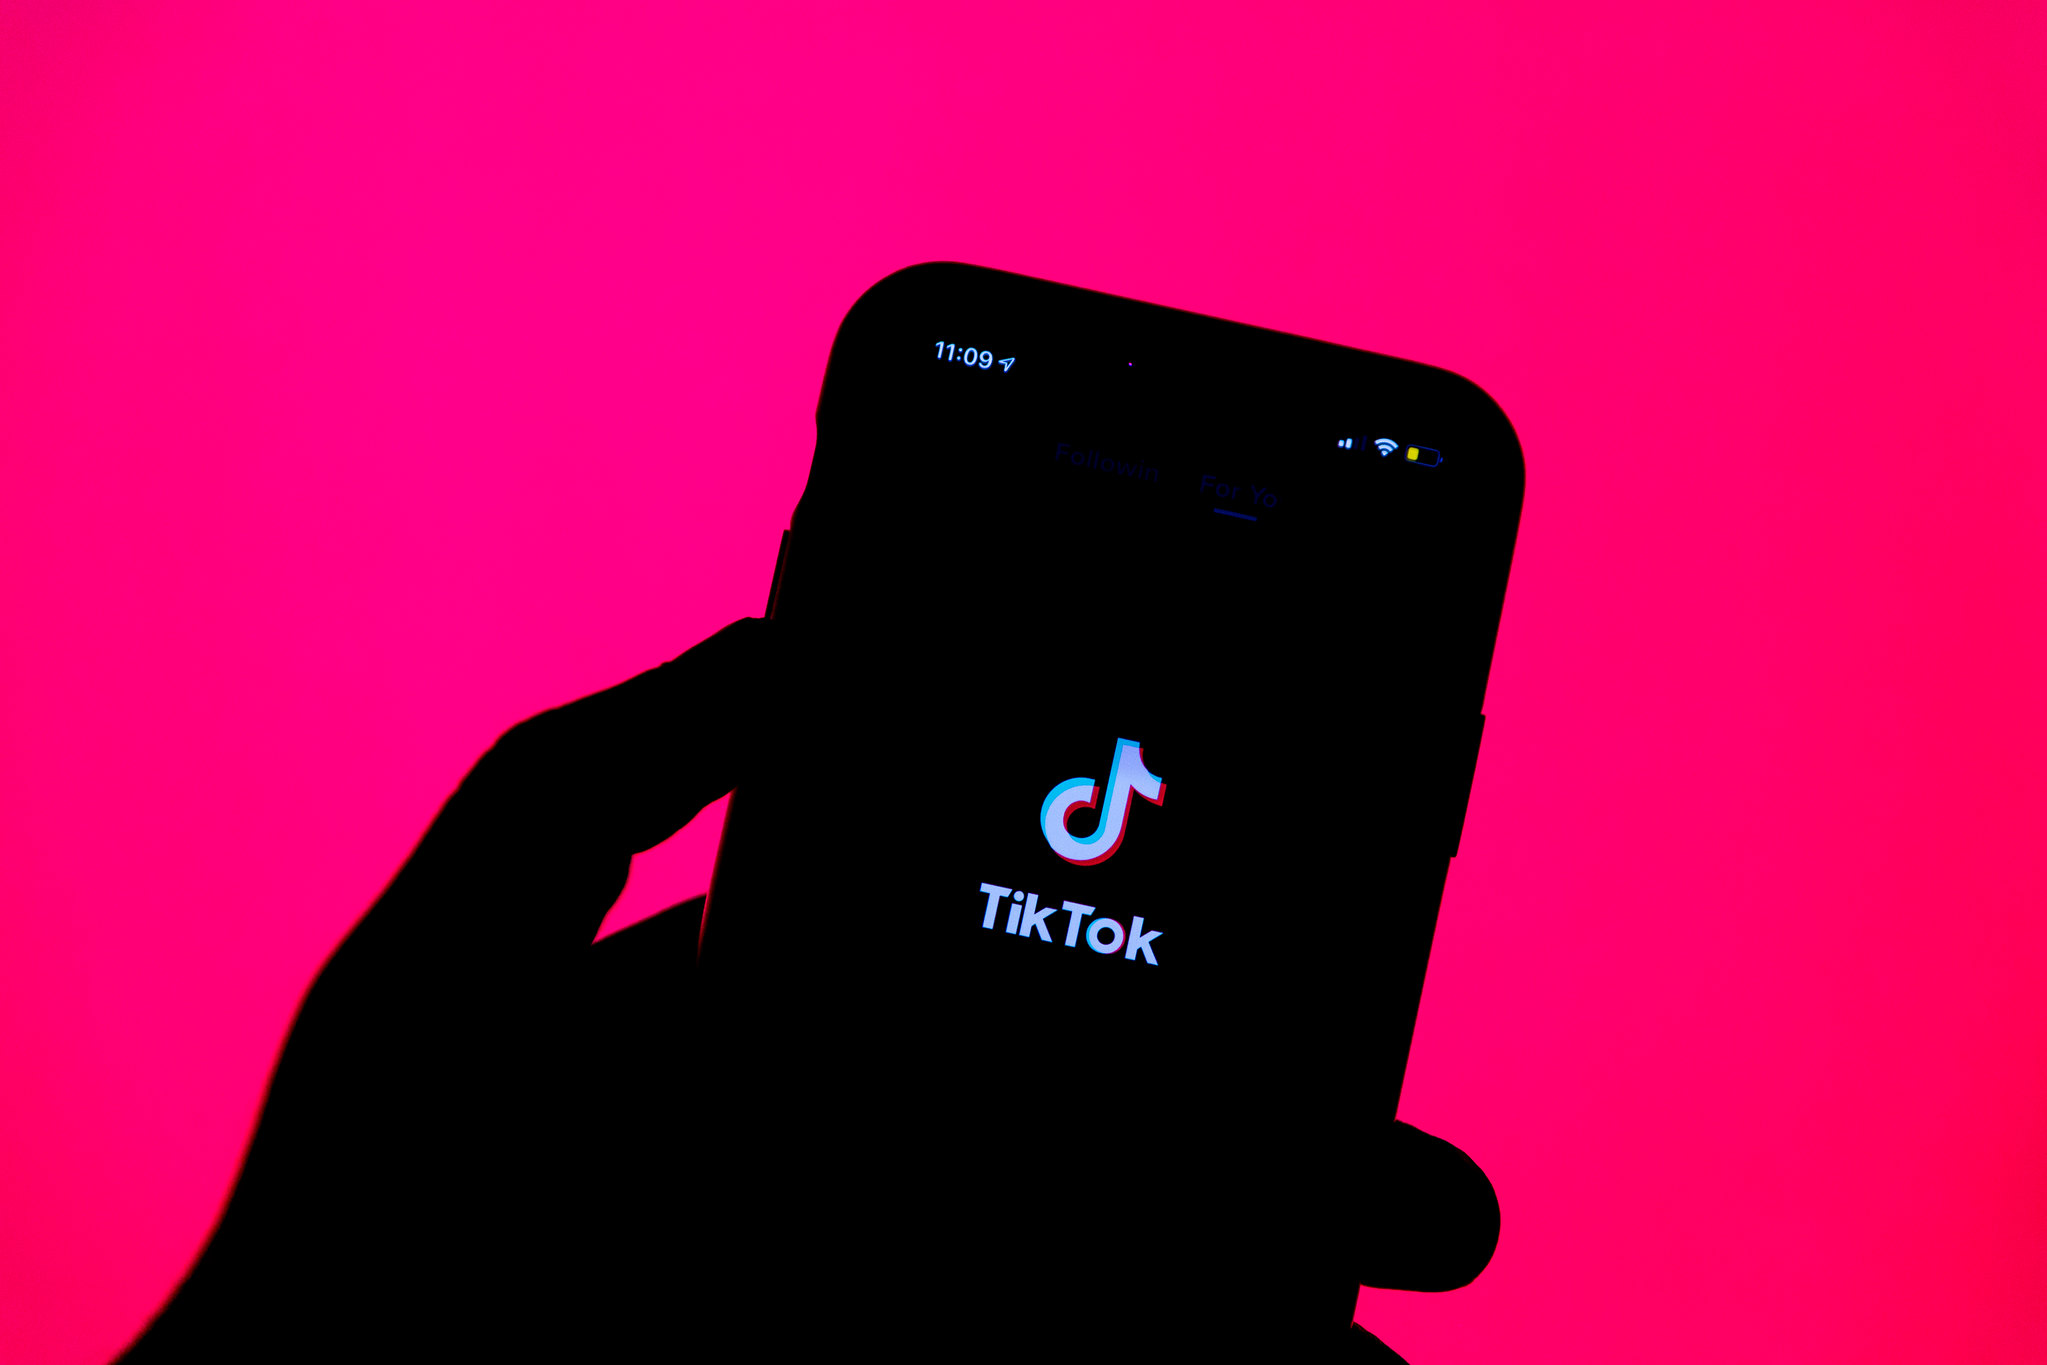 A silhouette of a person holding up a phone with the TikTok logo on a hot pink background